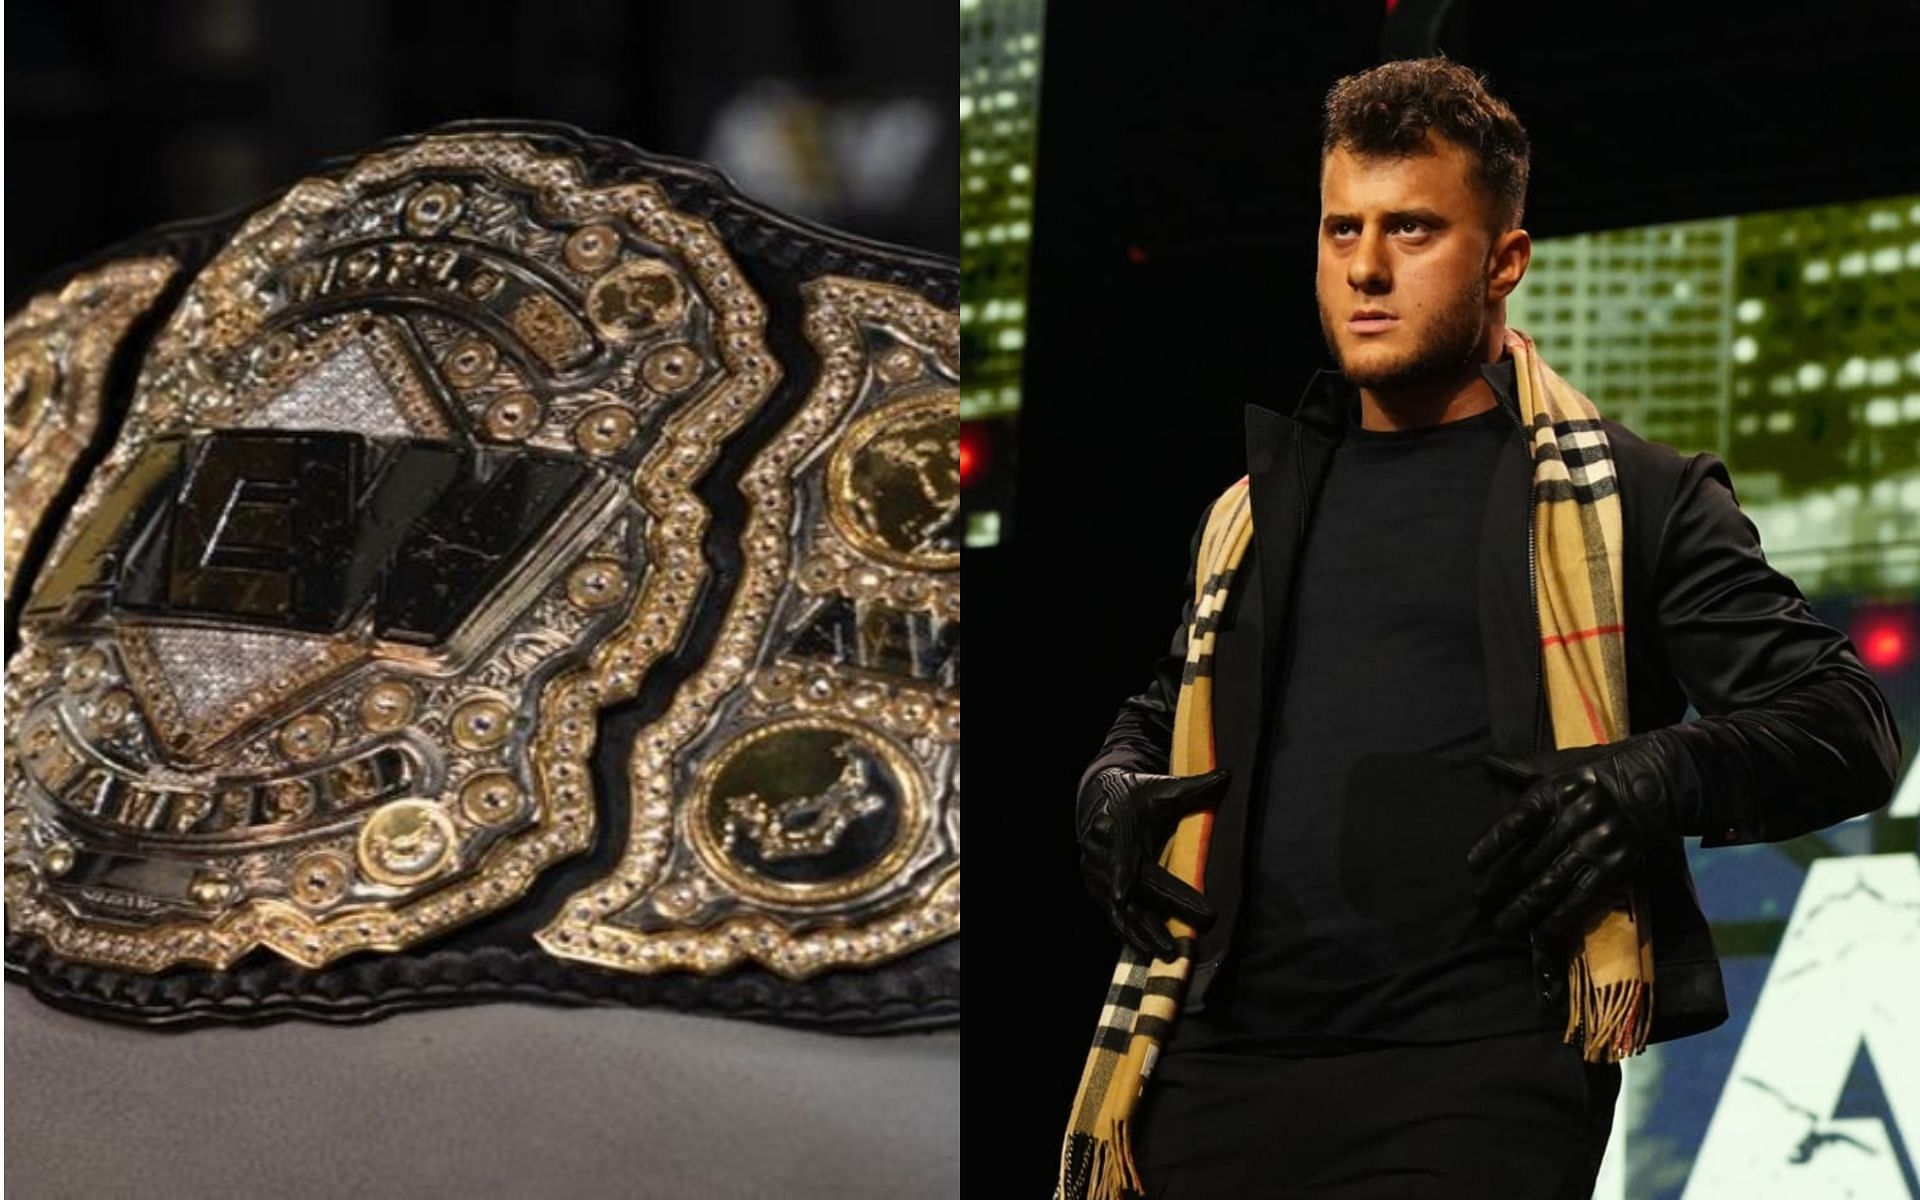 MJF has the potential to become AEW World Champion in the future.